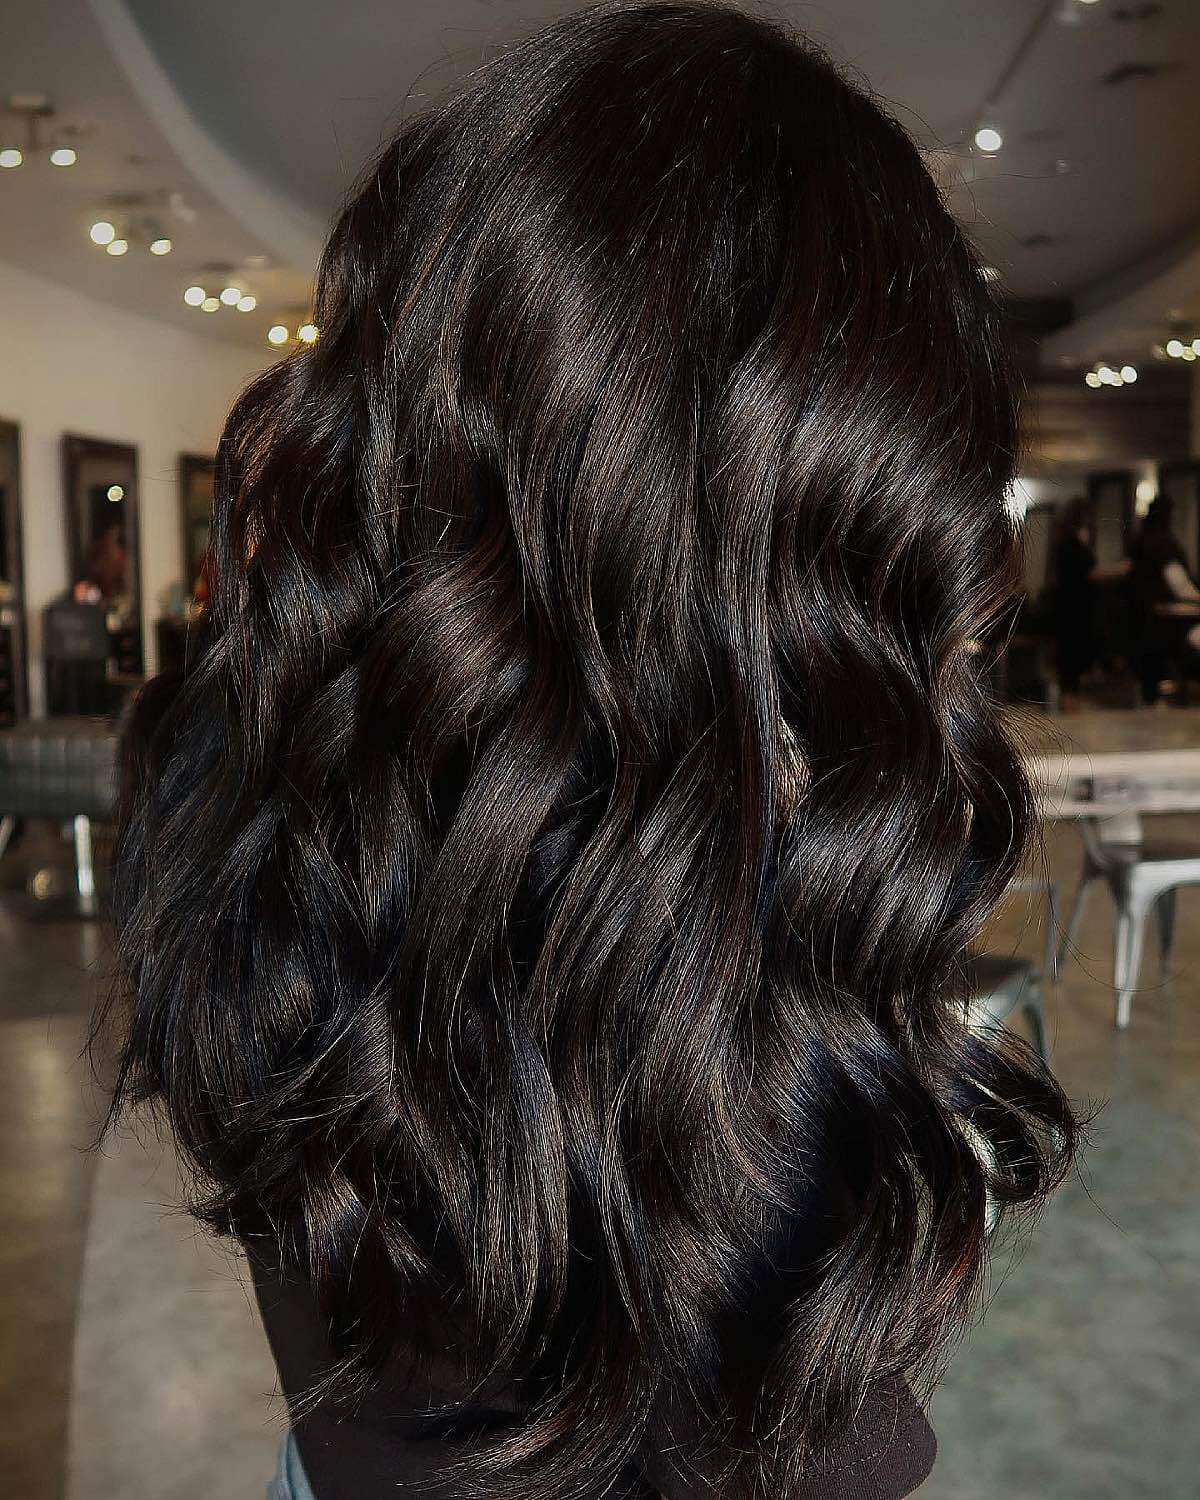 Solid dark chocolate hair color